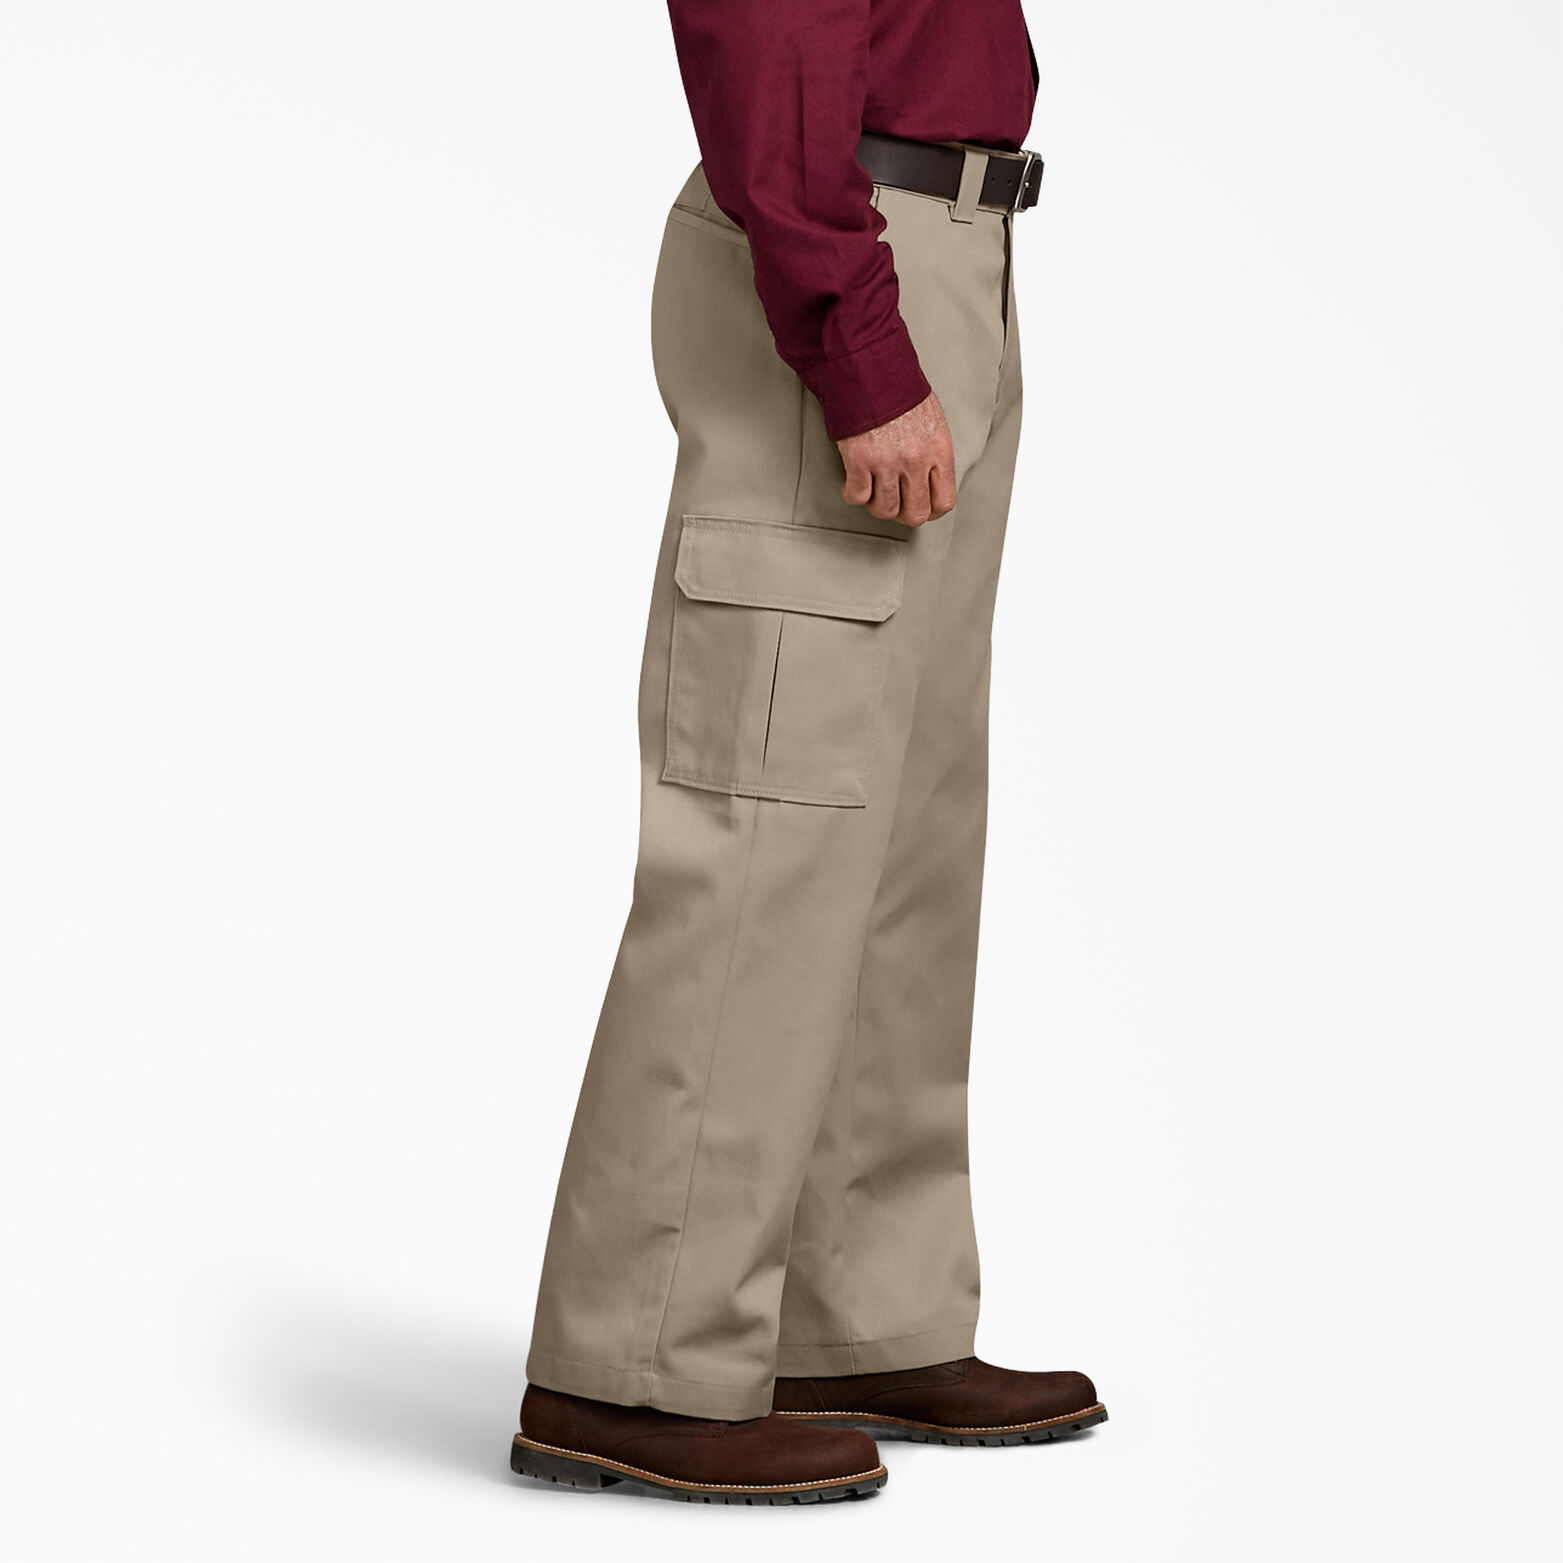 Dickies Relaxed Fit Cargo Work Pants - FitnessRetro